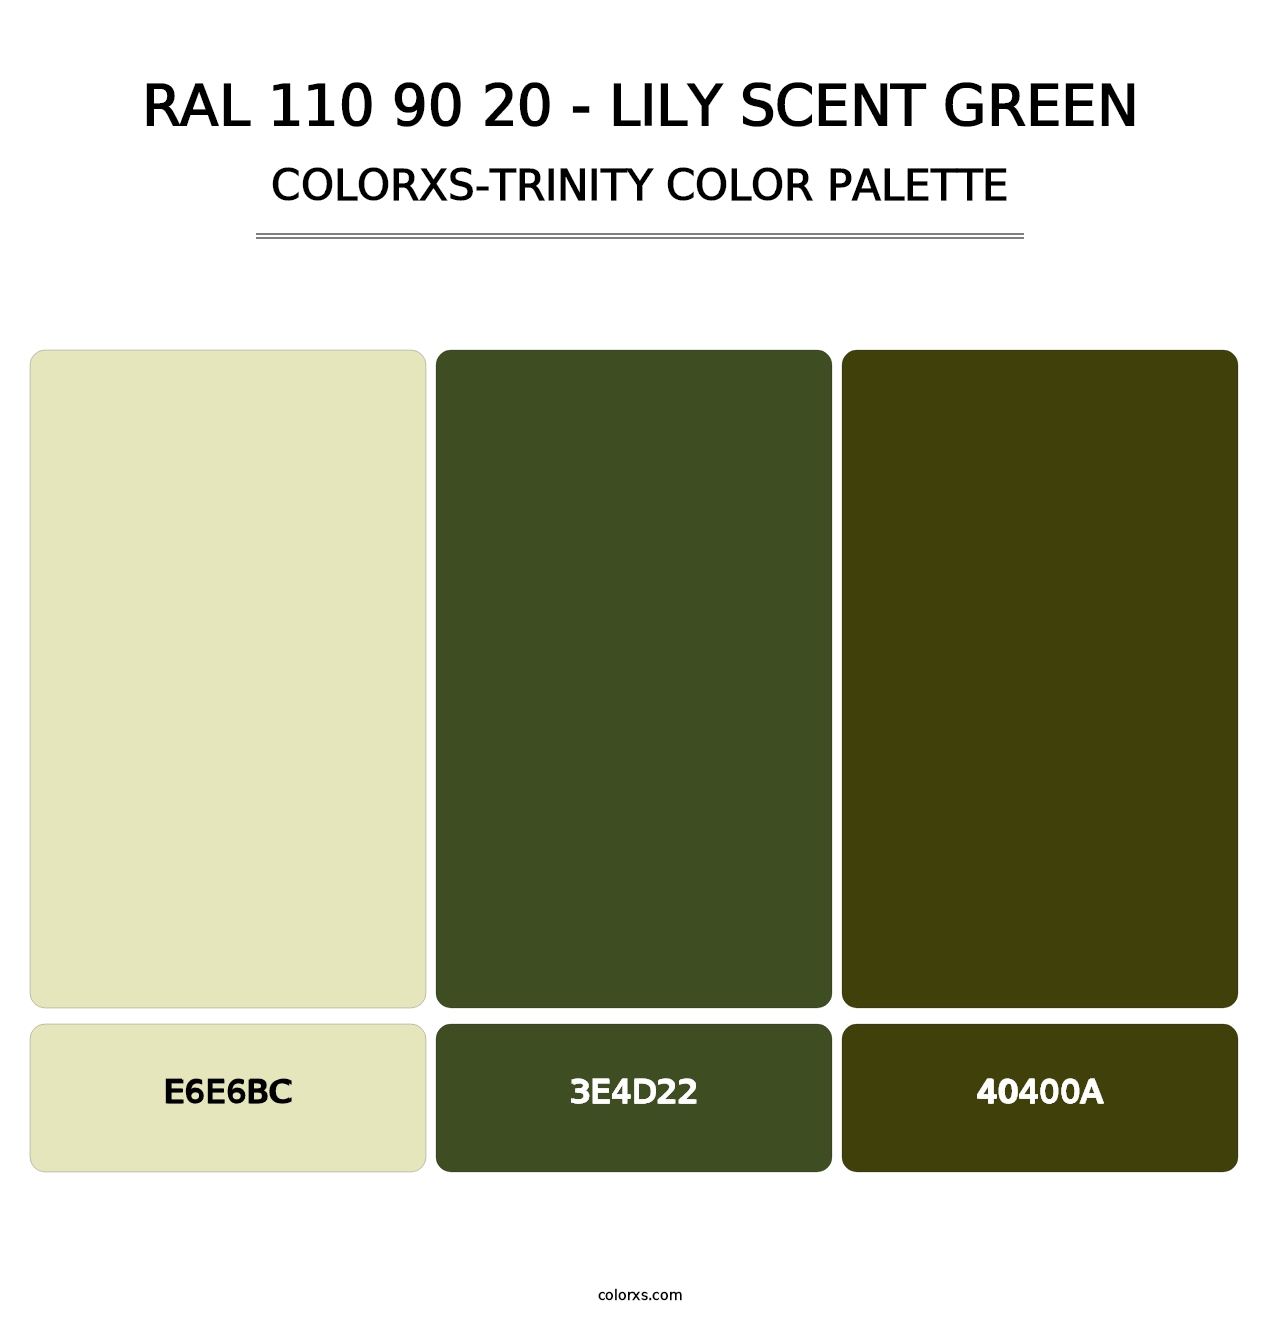 RAL 110 90 20 - Lily Scent Green - Colorxs Trinity Palette